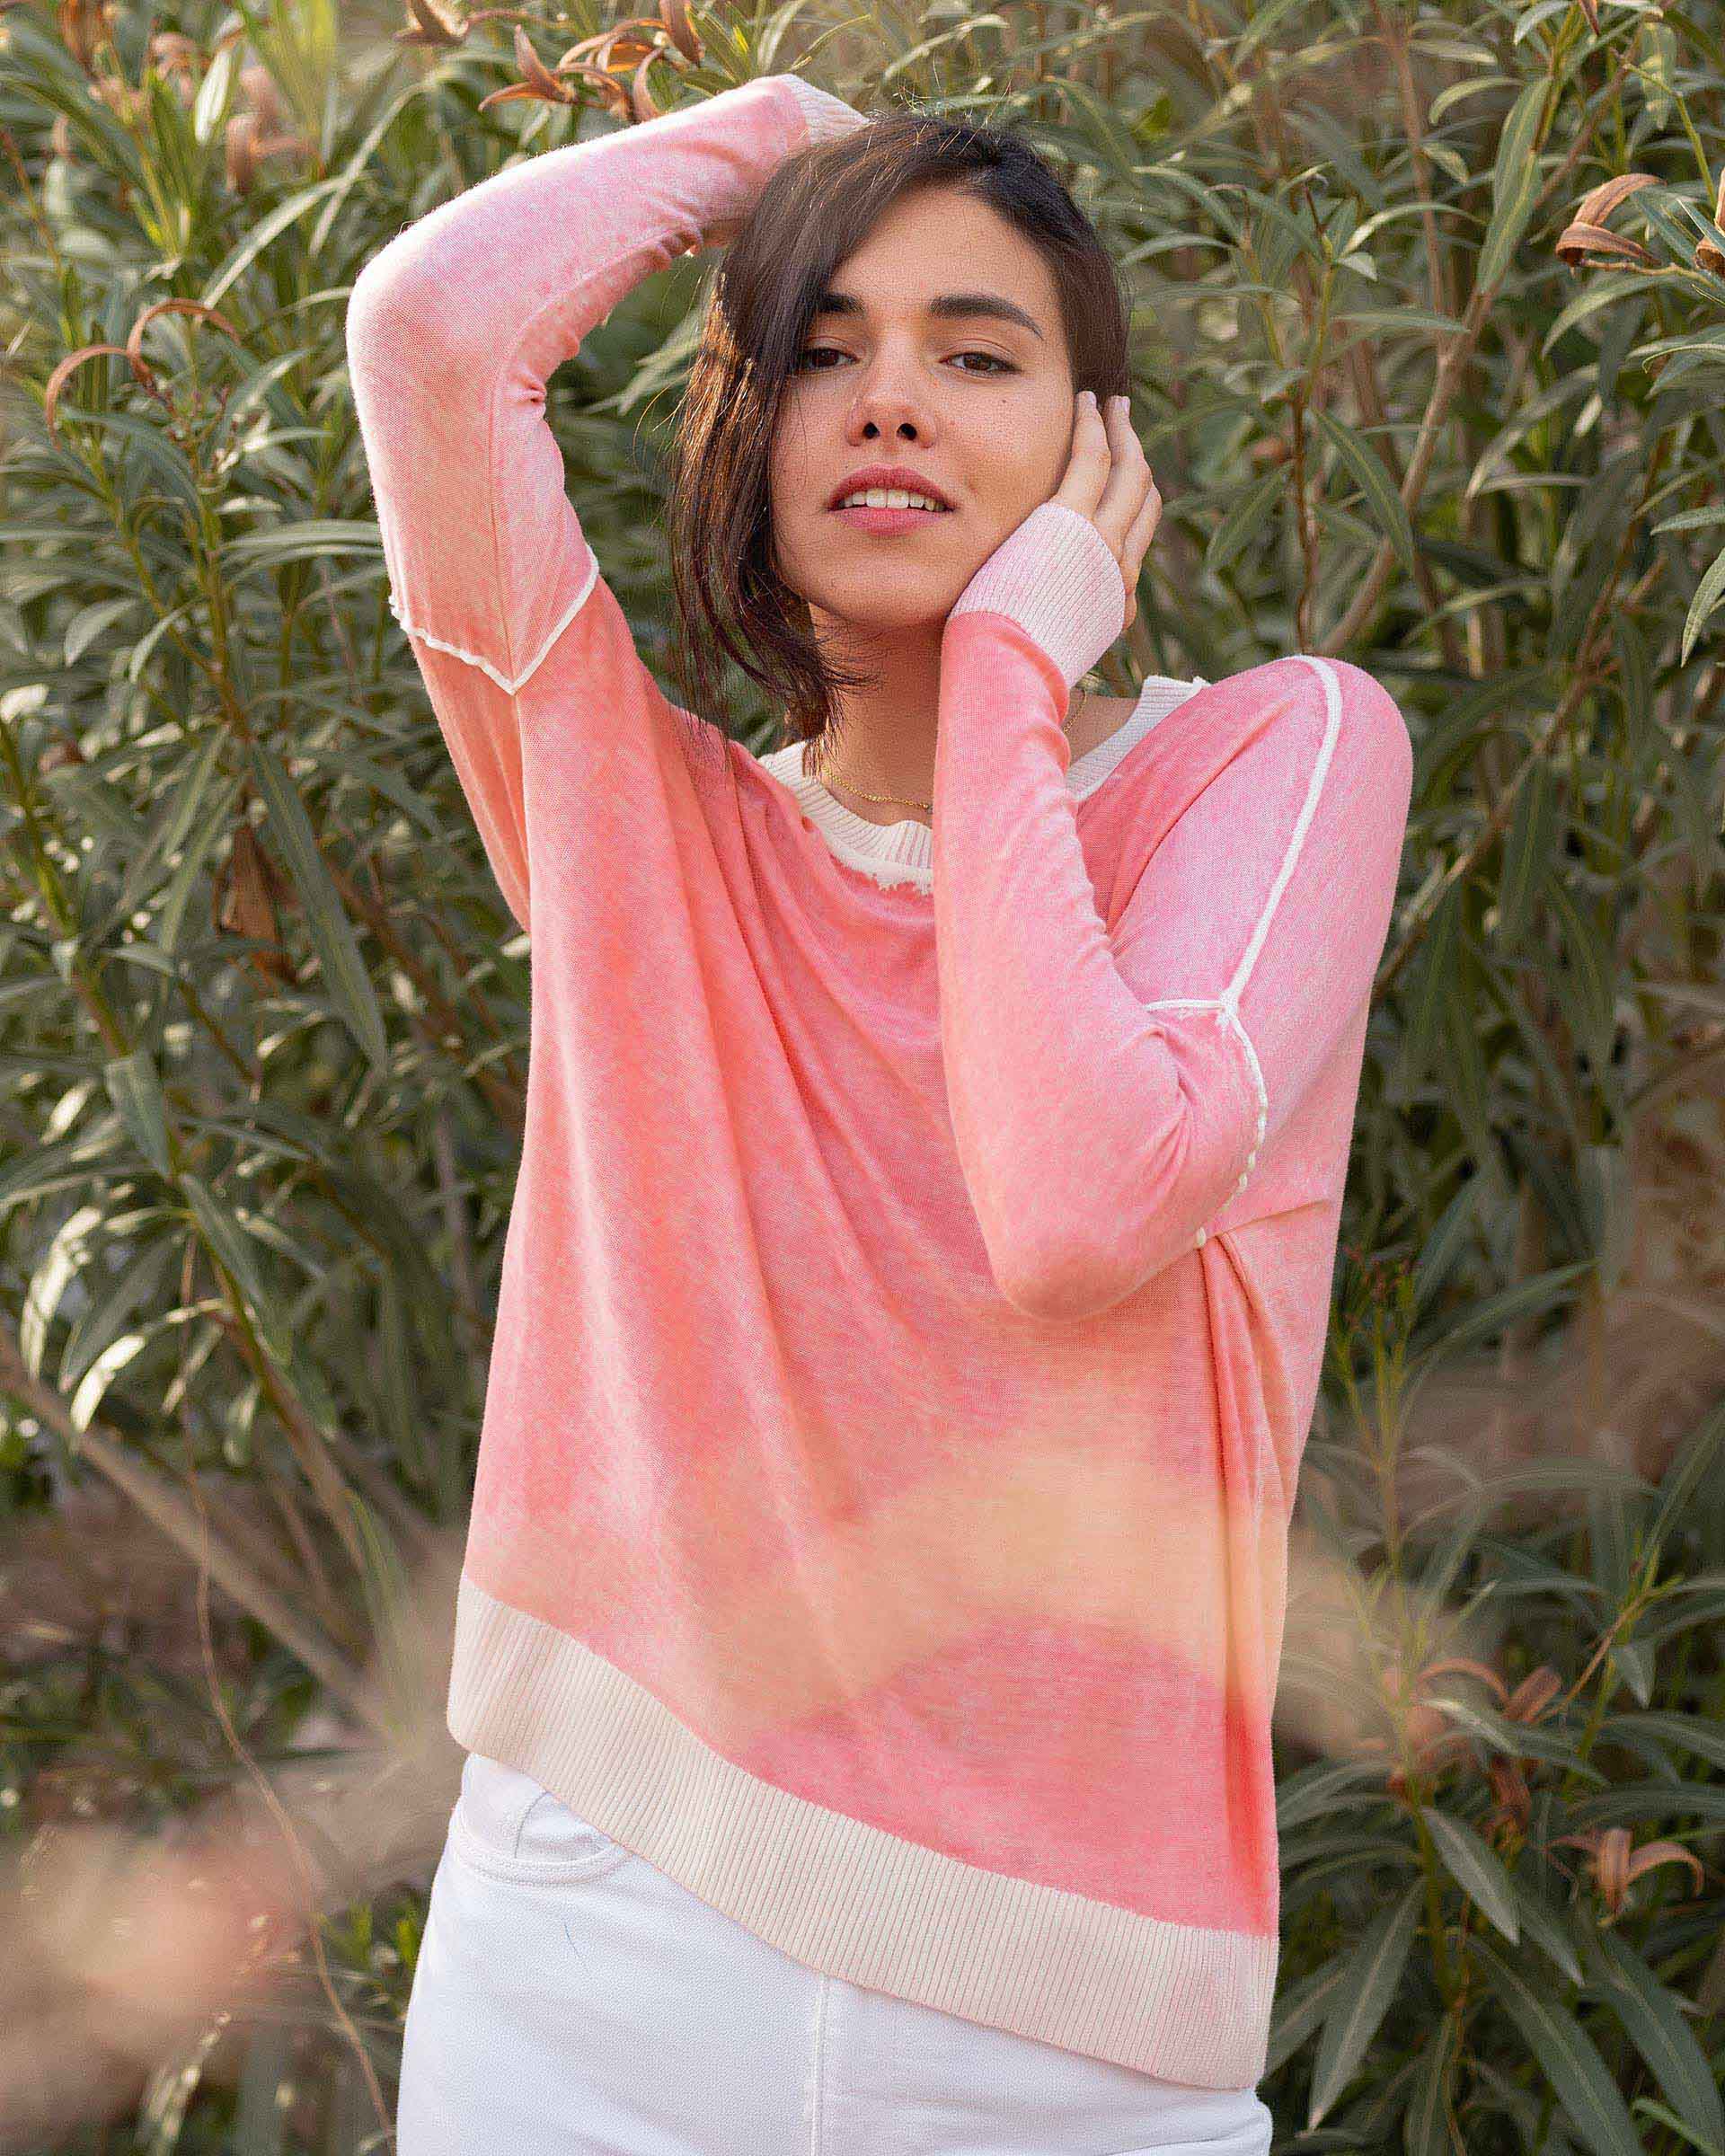 Female wearing pink hand-dyed cashmere sweater with hands behind her head stands in front of plants